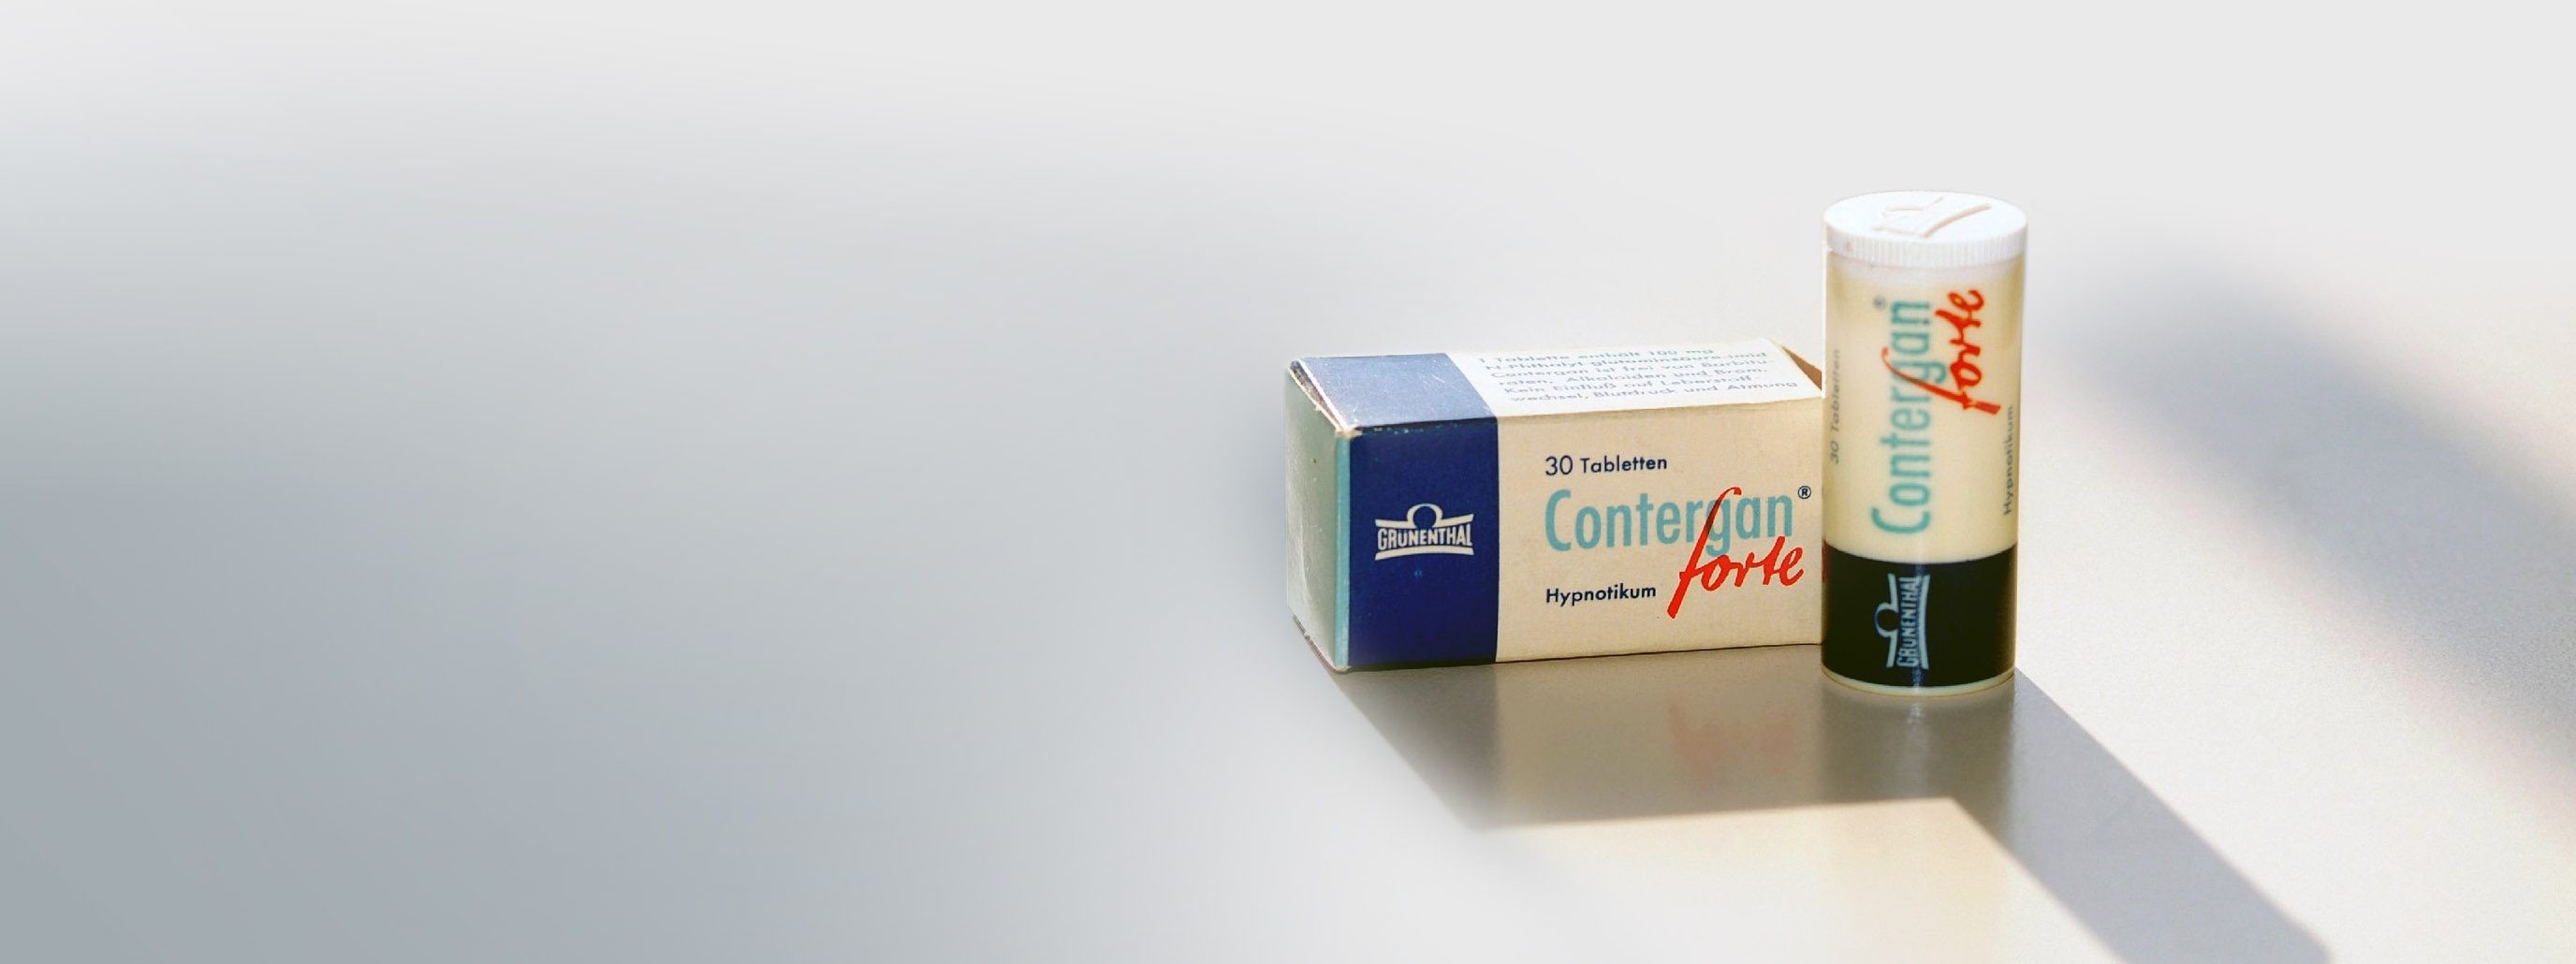 A package of the drug thalidomide Forte.